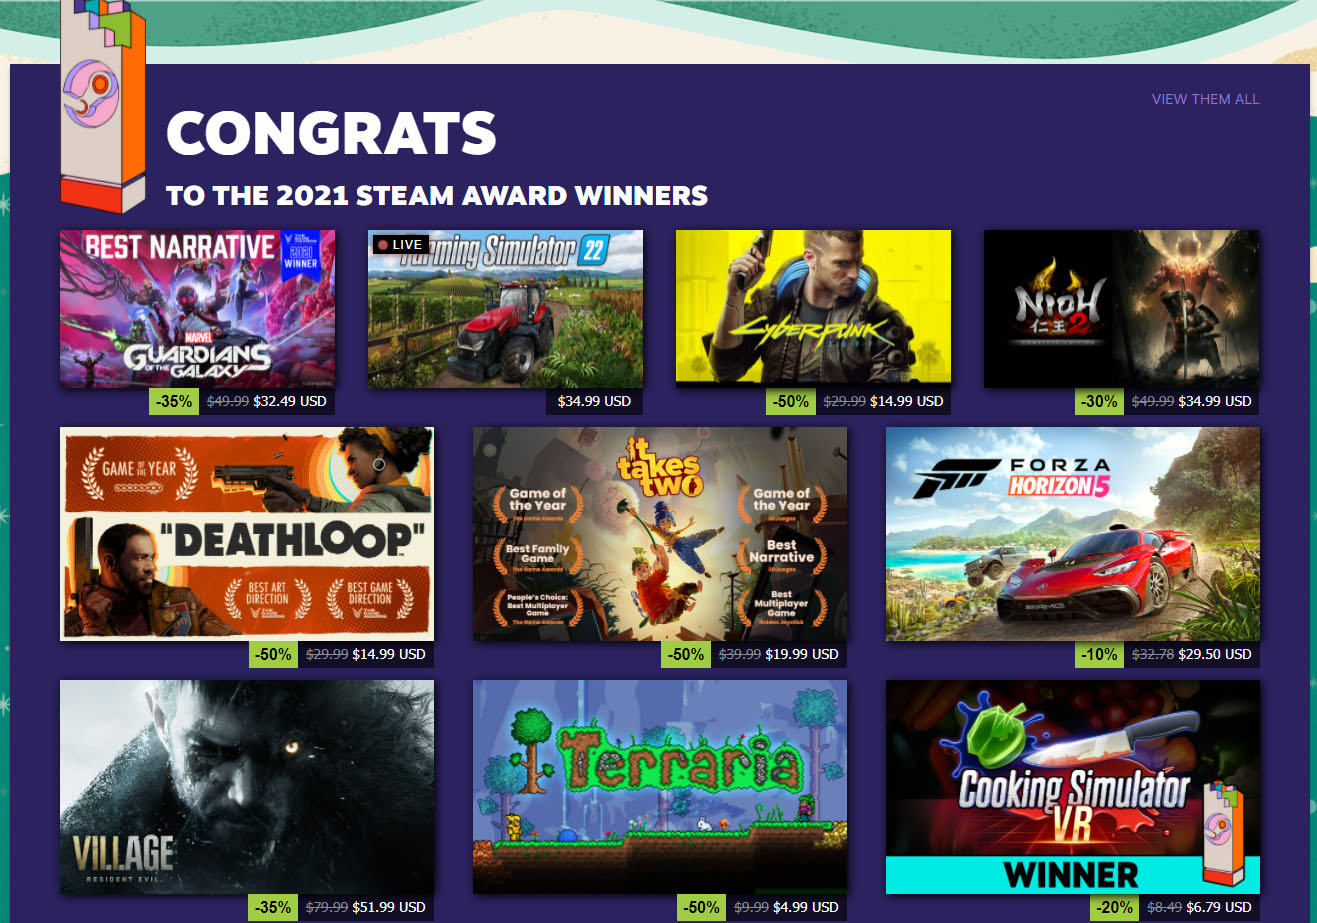 The 2021 Steam Award Winners game cover